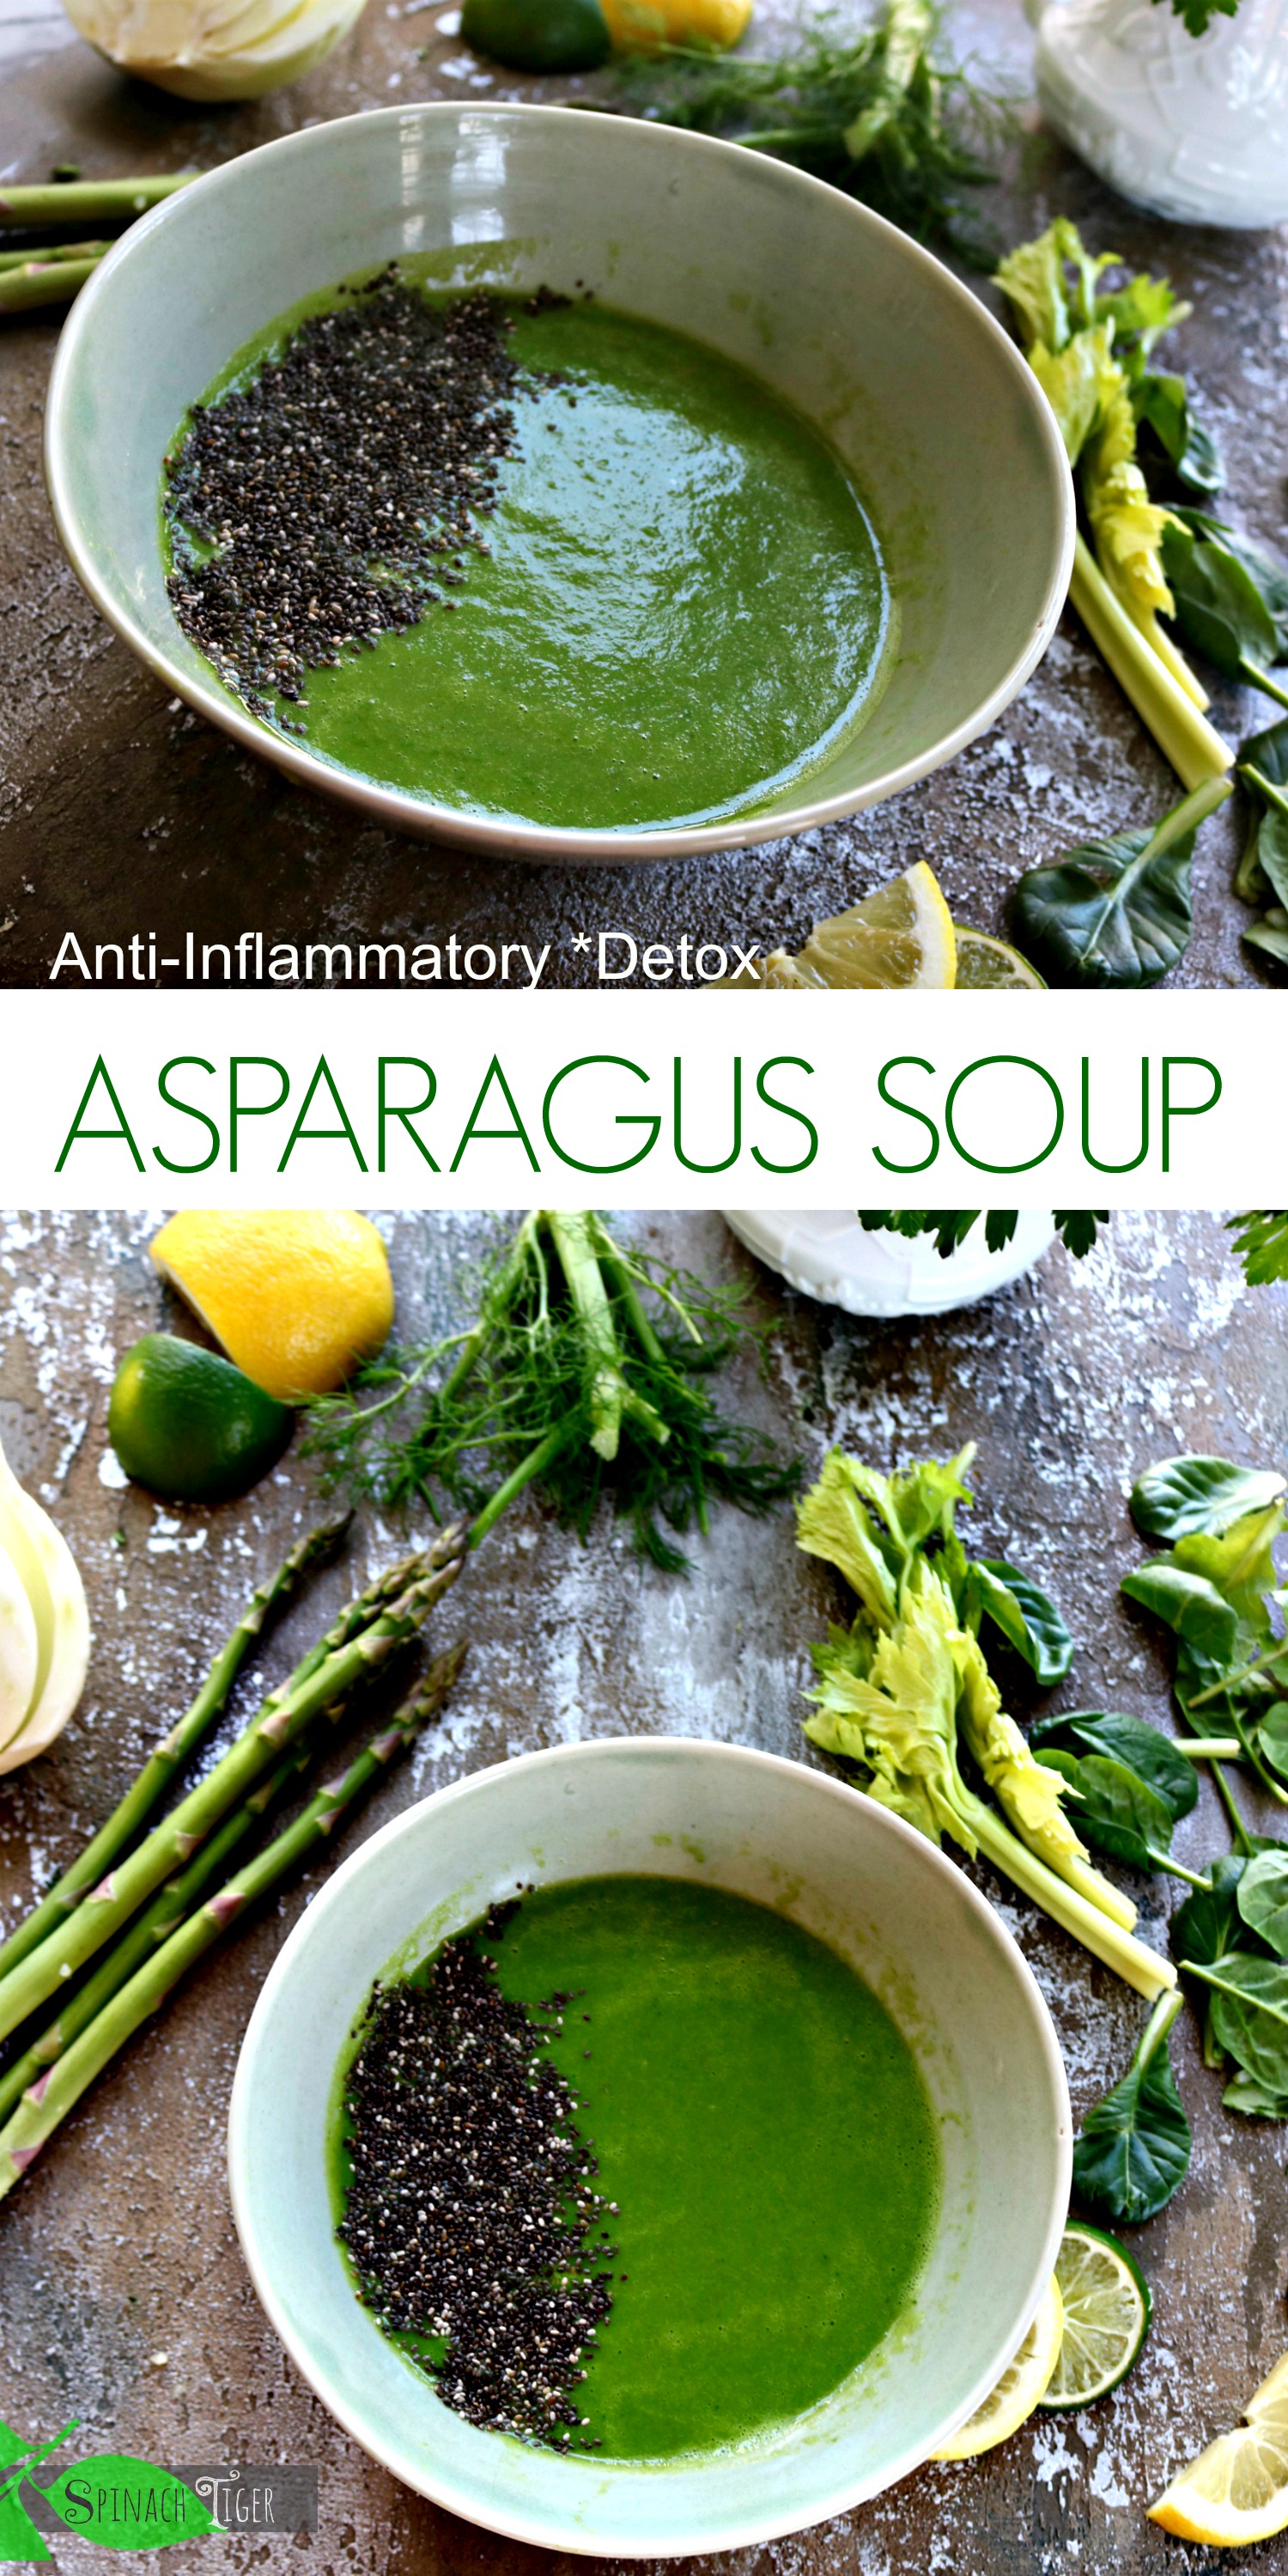 This Healthy Asparagus Soup Recipe is ant-inflammatory, Paleo, Vegan, and Easy from Spinach Tiger